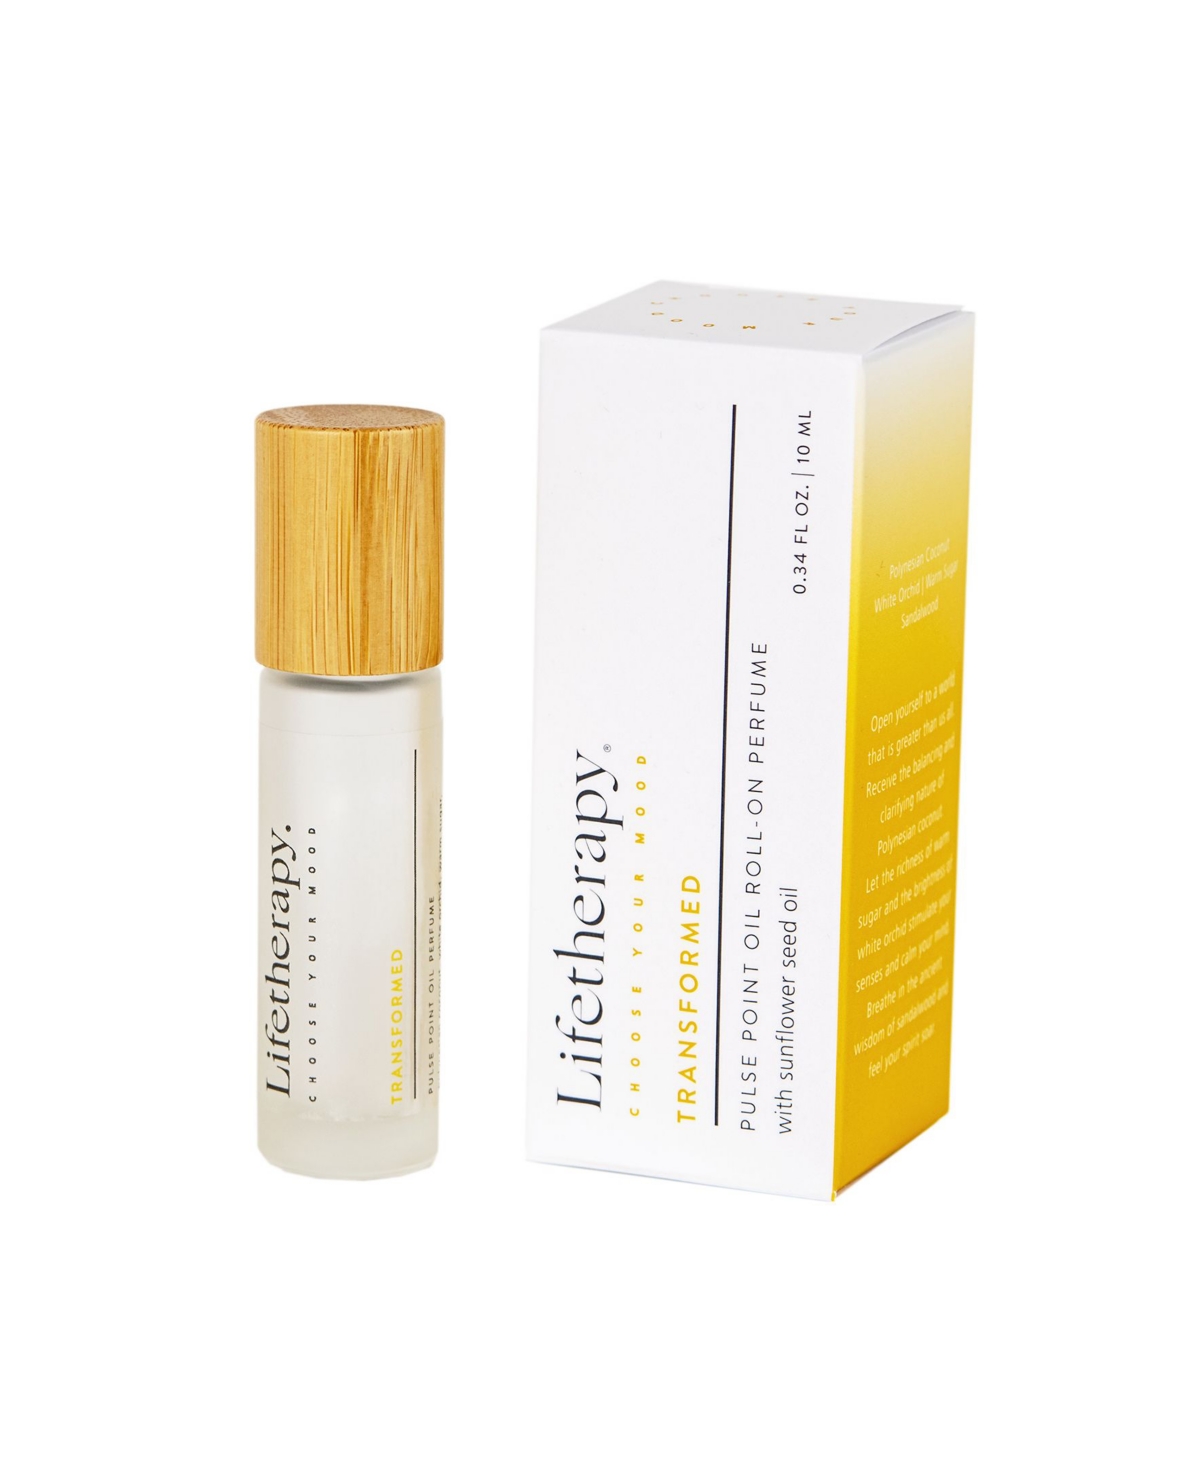 Lifetherapy Transformed Pulse Point Oil Roll-On Perfume, 0.34 oz